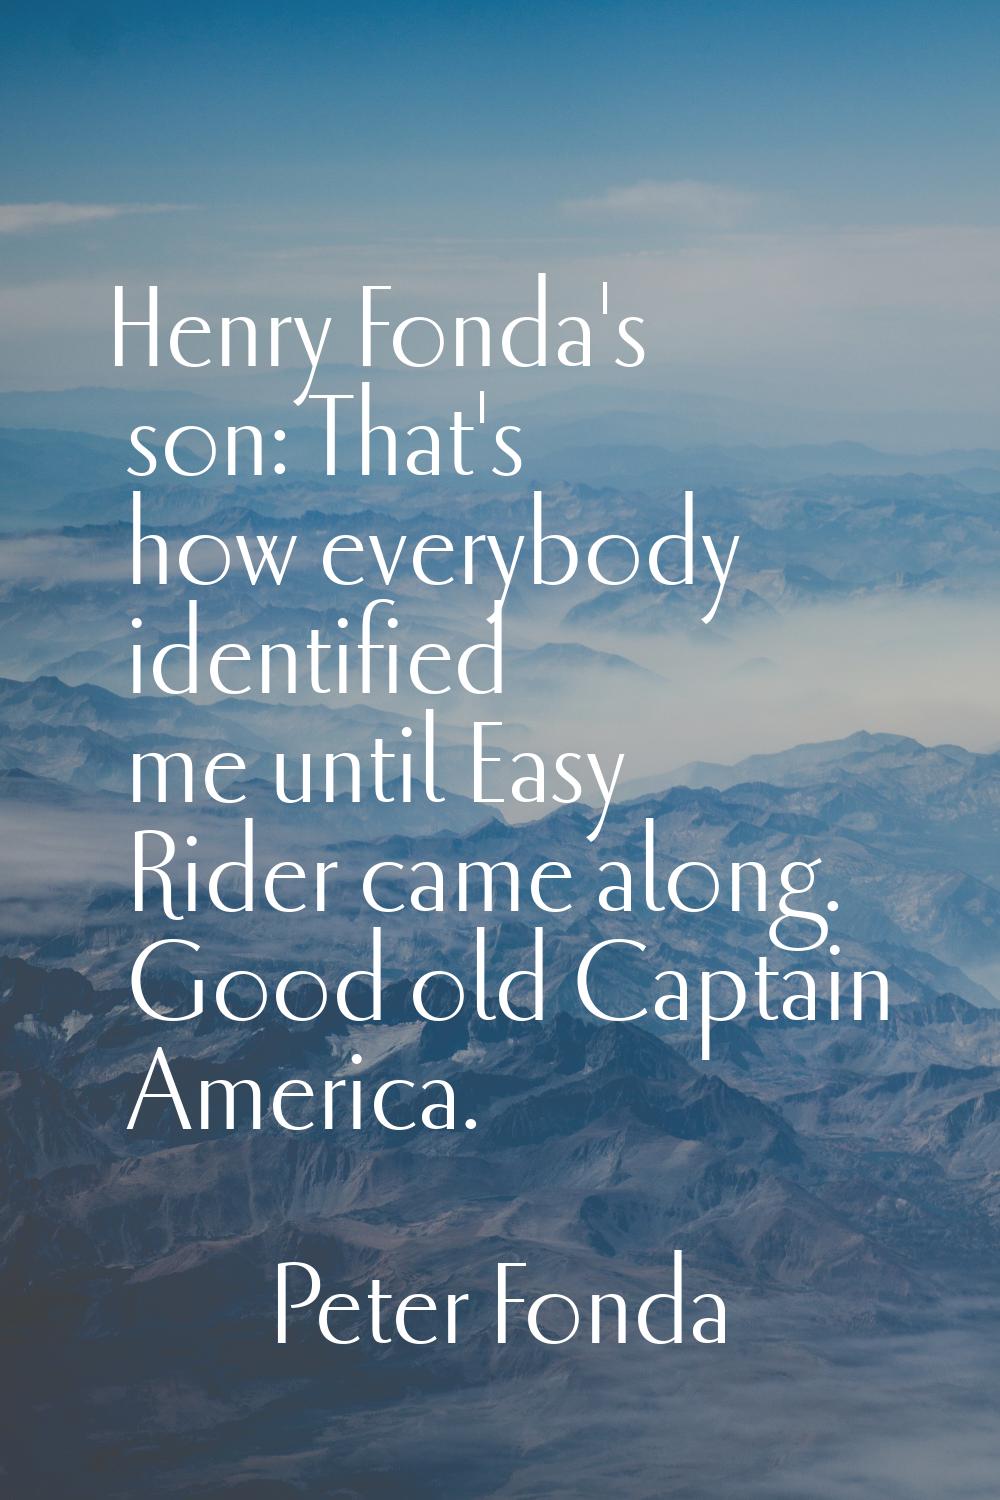 Henry Fonda's son: That's how everybody identified me until Easy Rider came along. Good old Captain